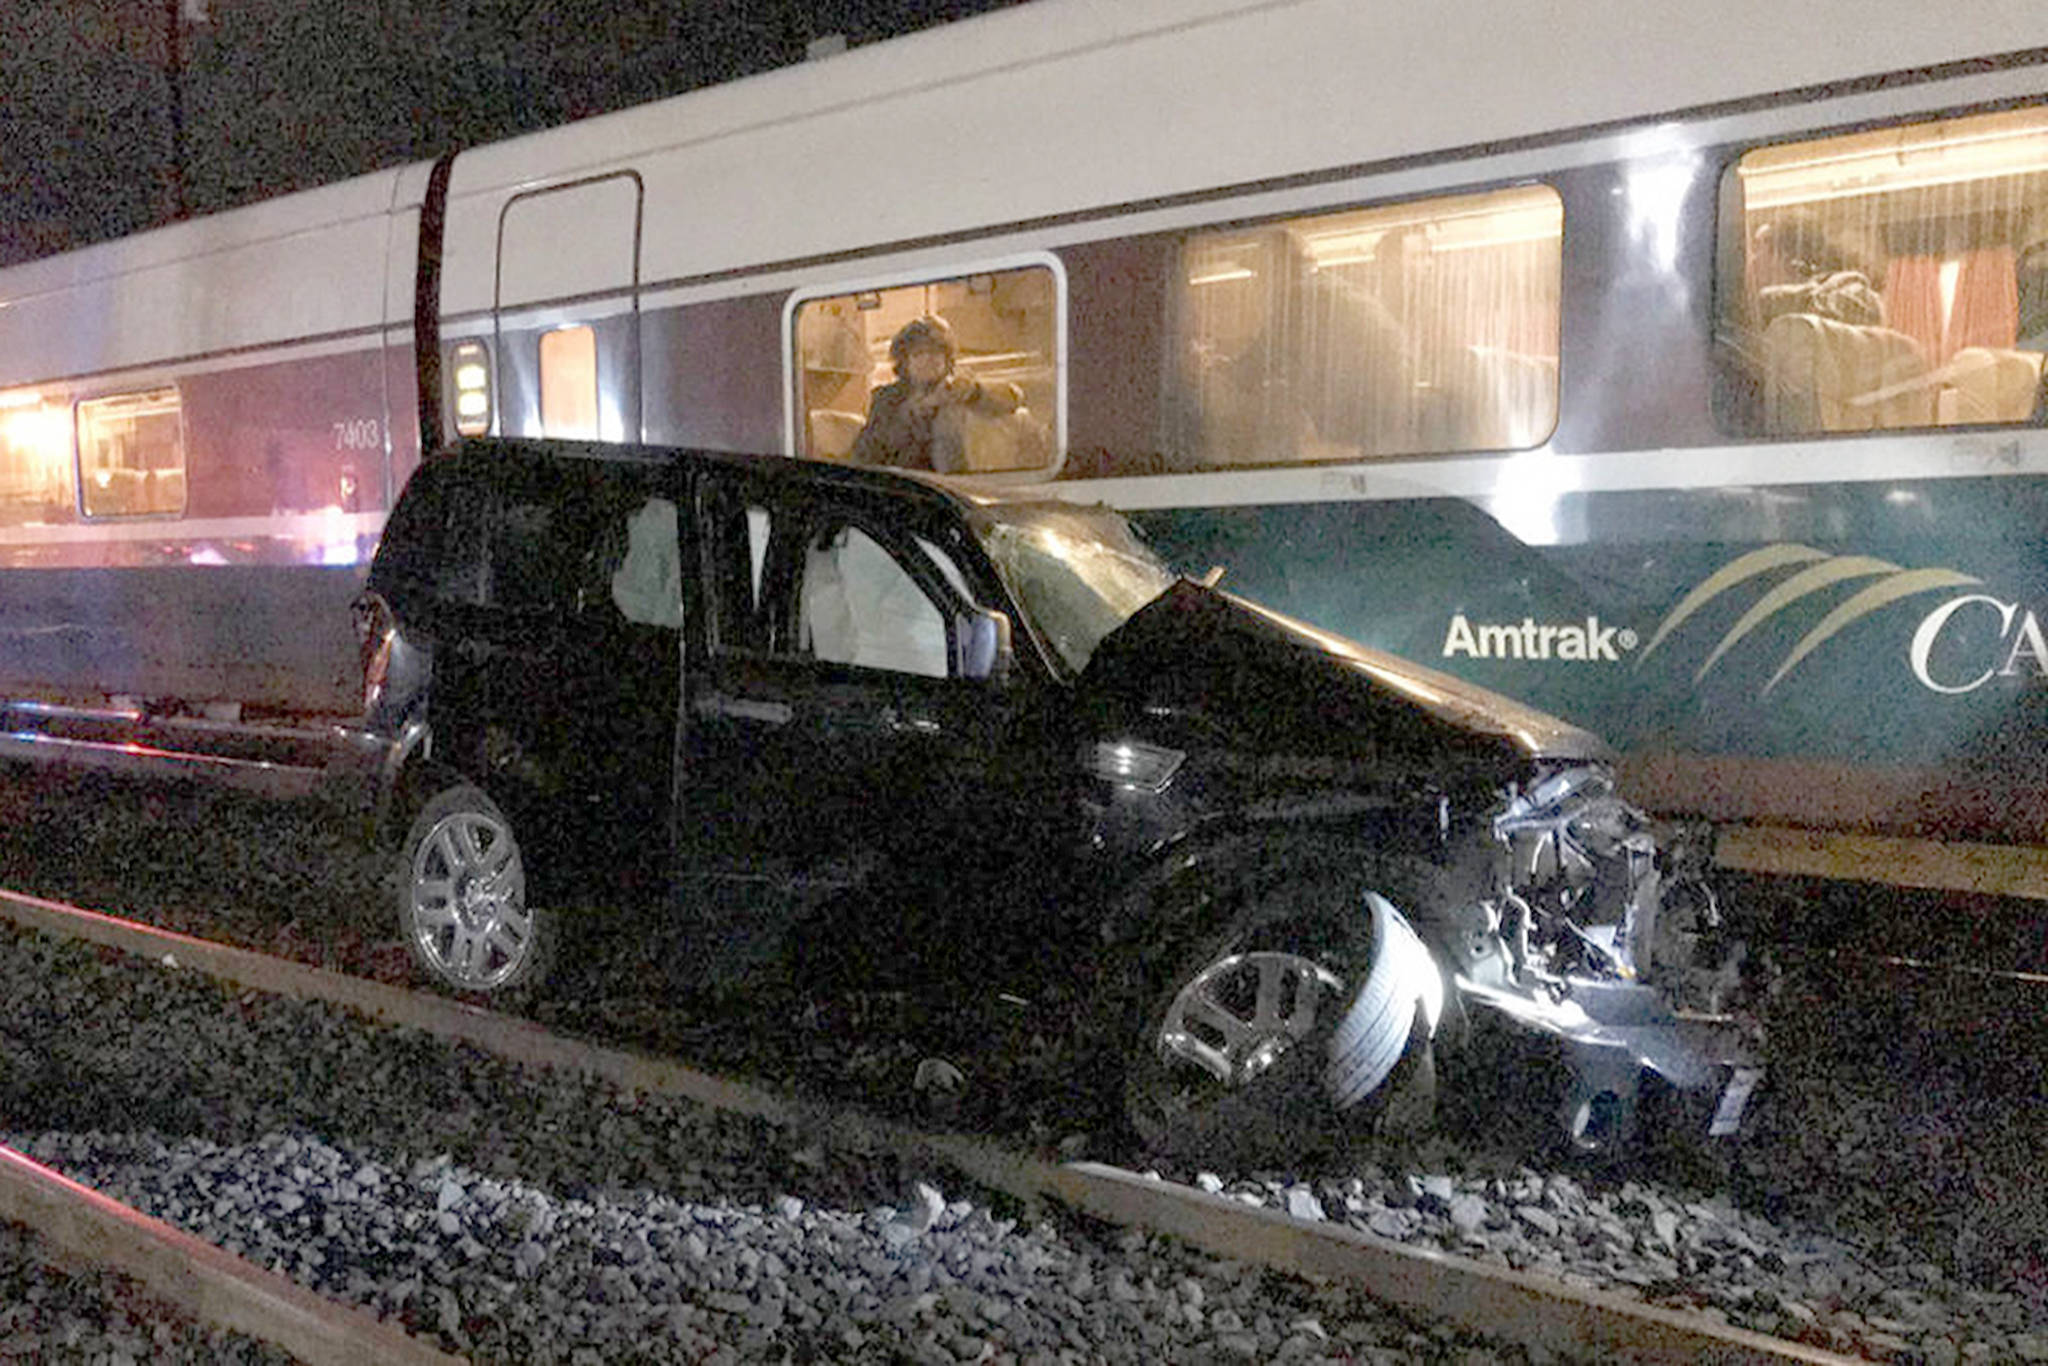 An SUV collided with a passenger train in Marysville, injuring 4. (Marysville Fire Photo)